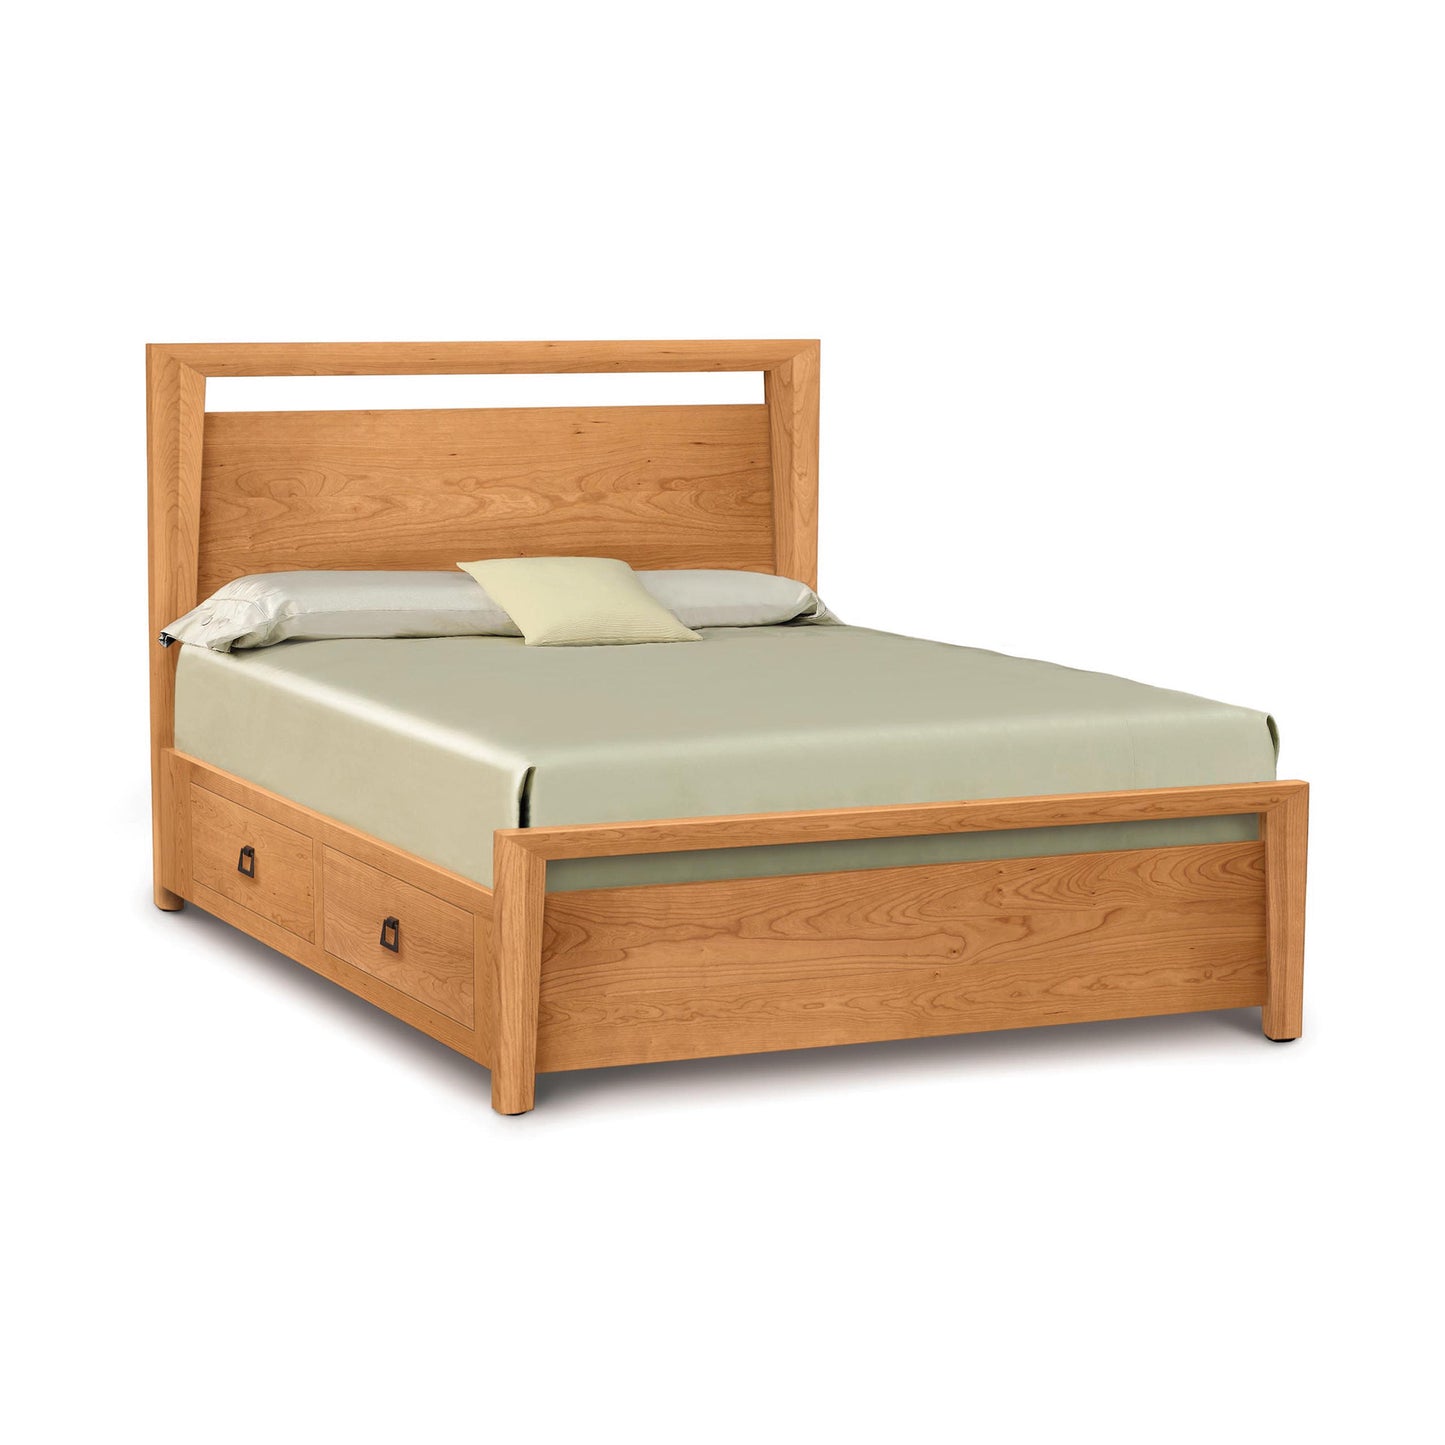 Mansfield Cherry Storage Bed by Copeland Furniture with storage drawers and a green bedsheet set against a white background, designed in the Arts and Crafts style.